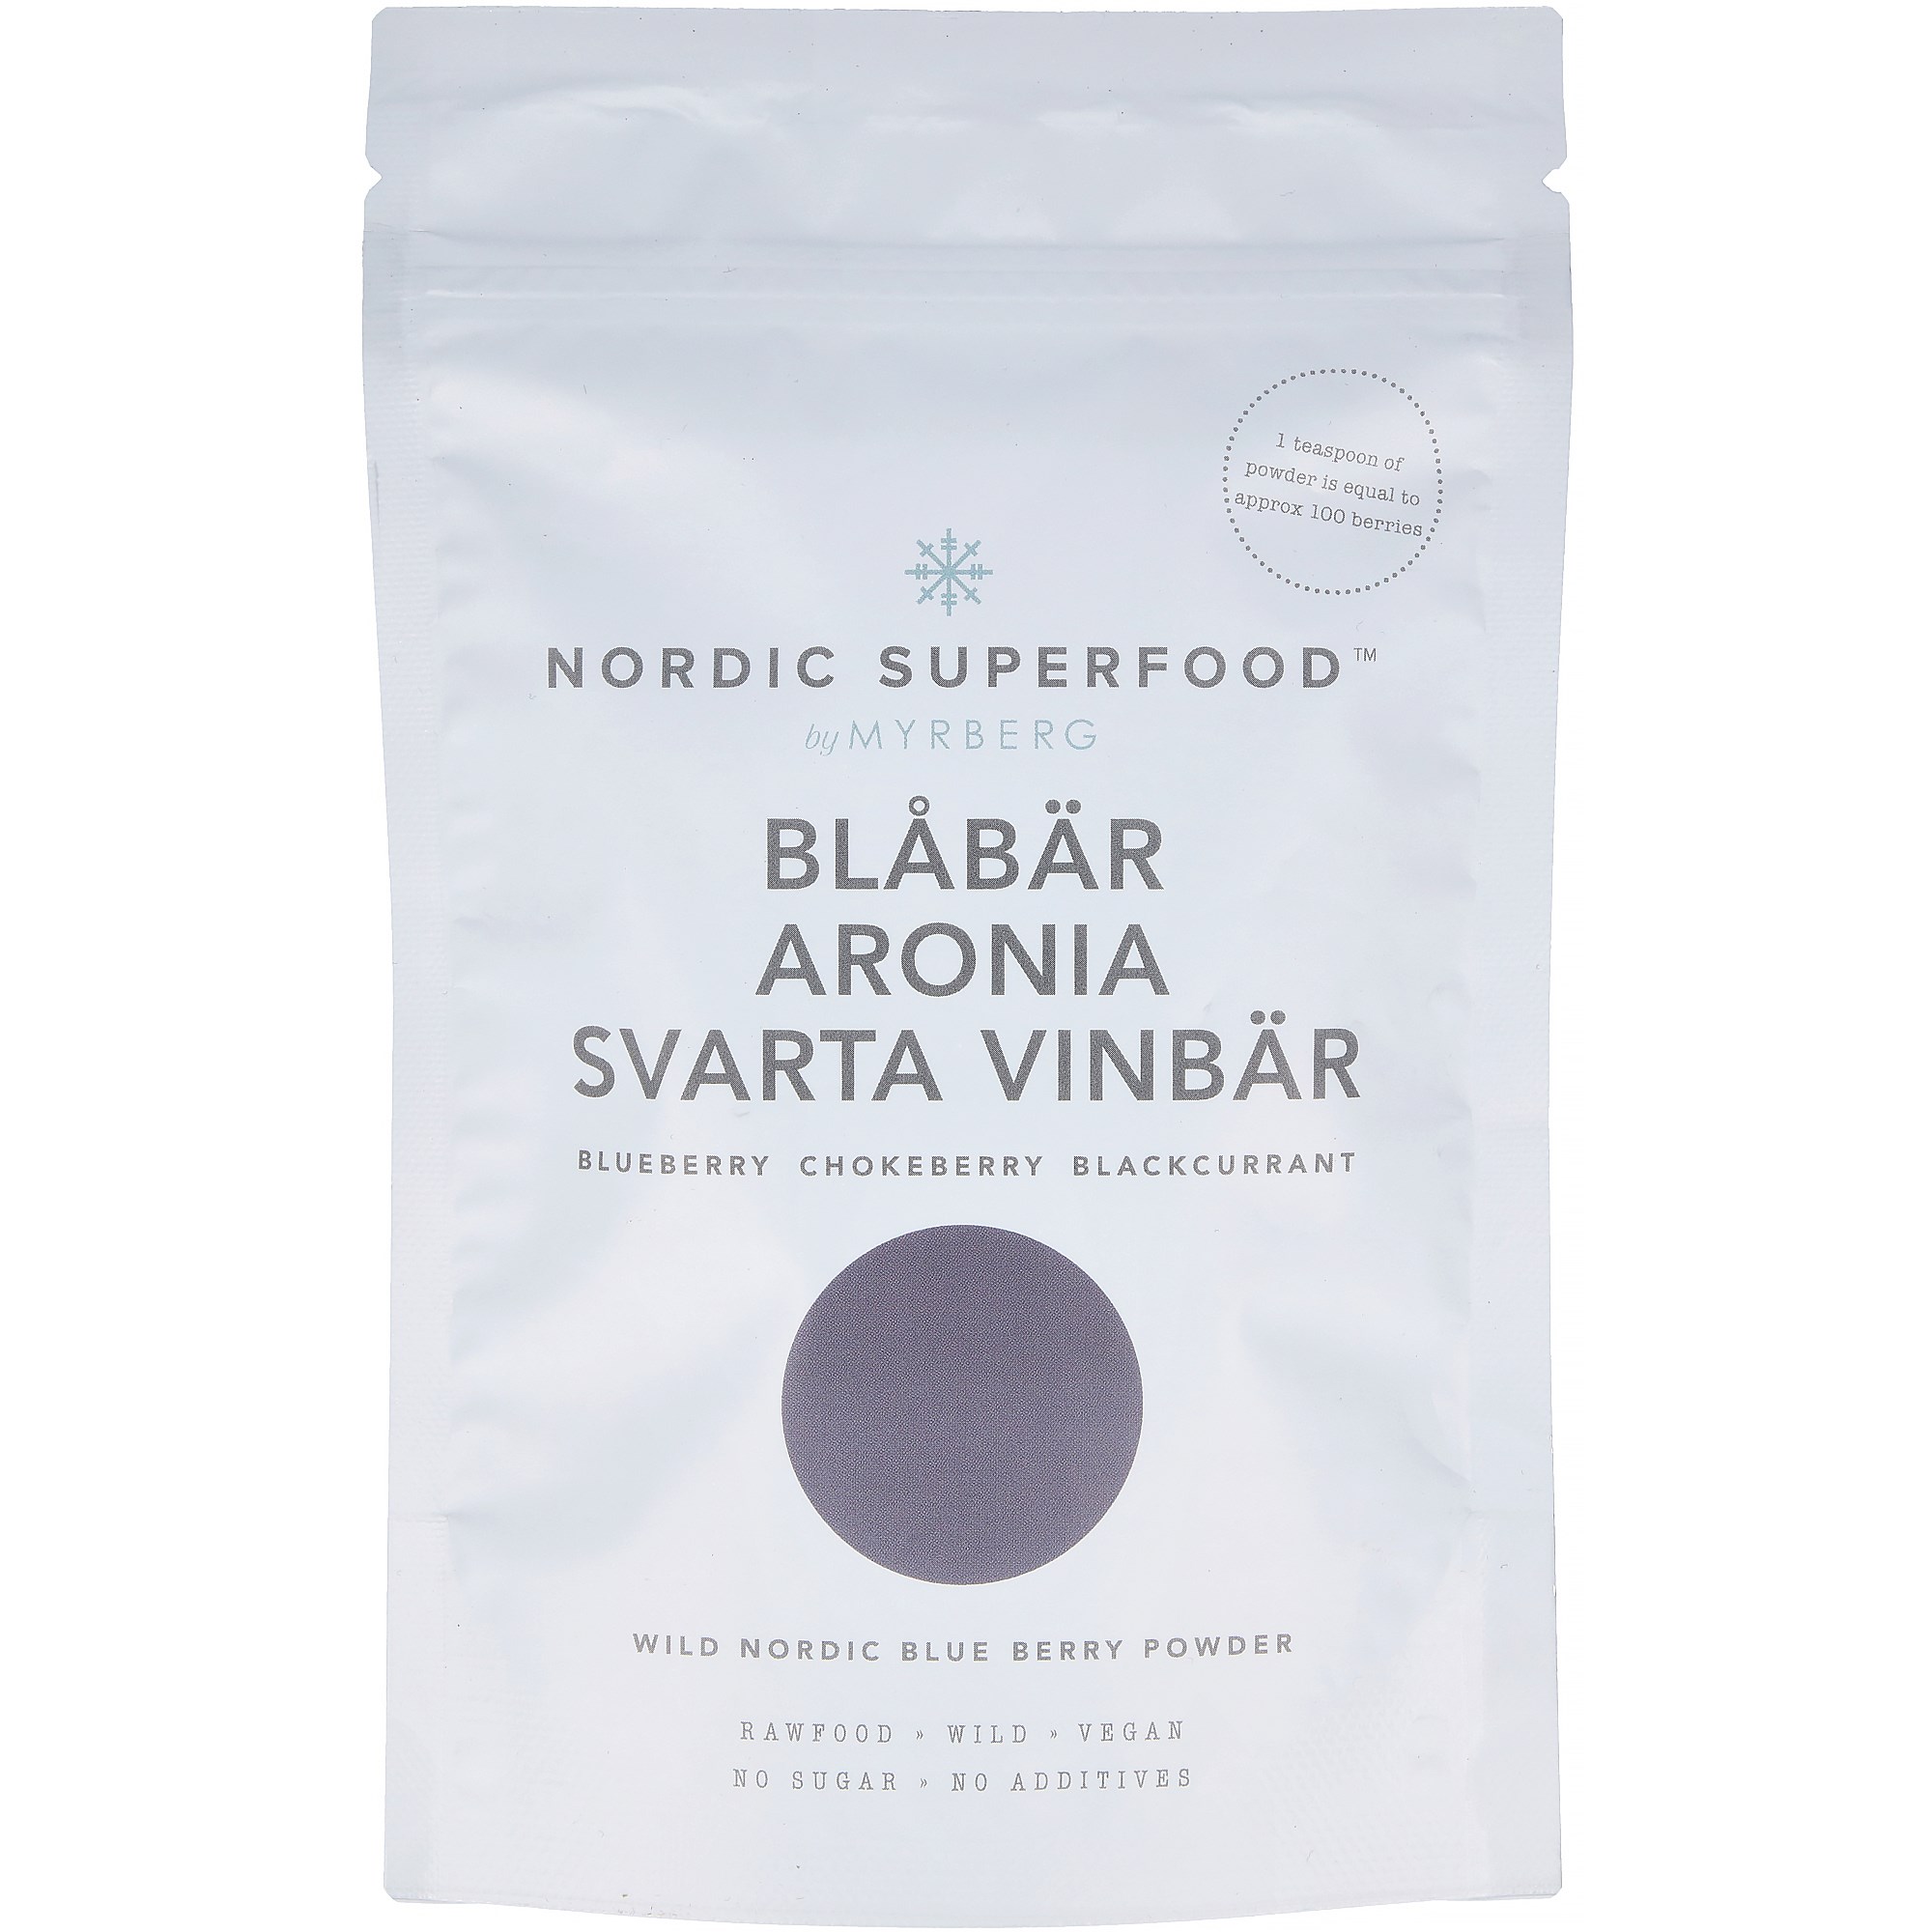 Nordic Superfood by Myrberg Wild Nordic Blue Berry Powder